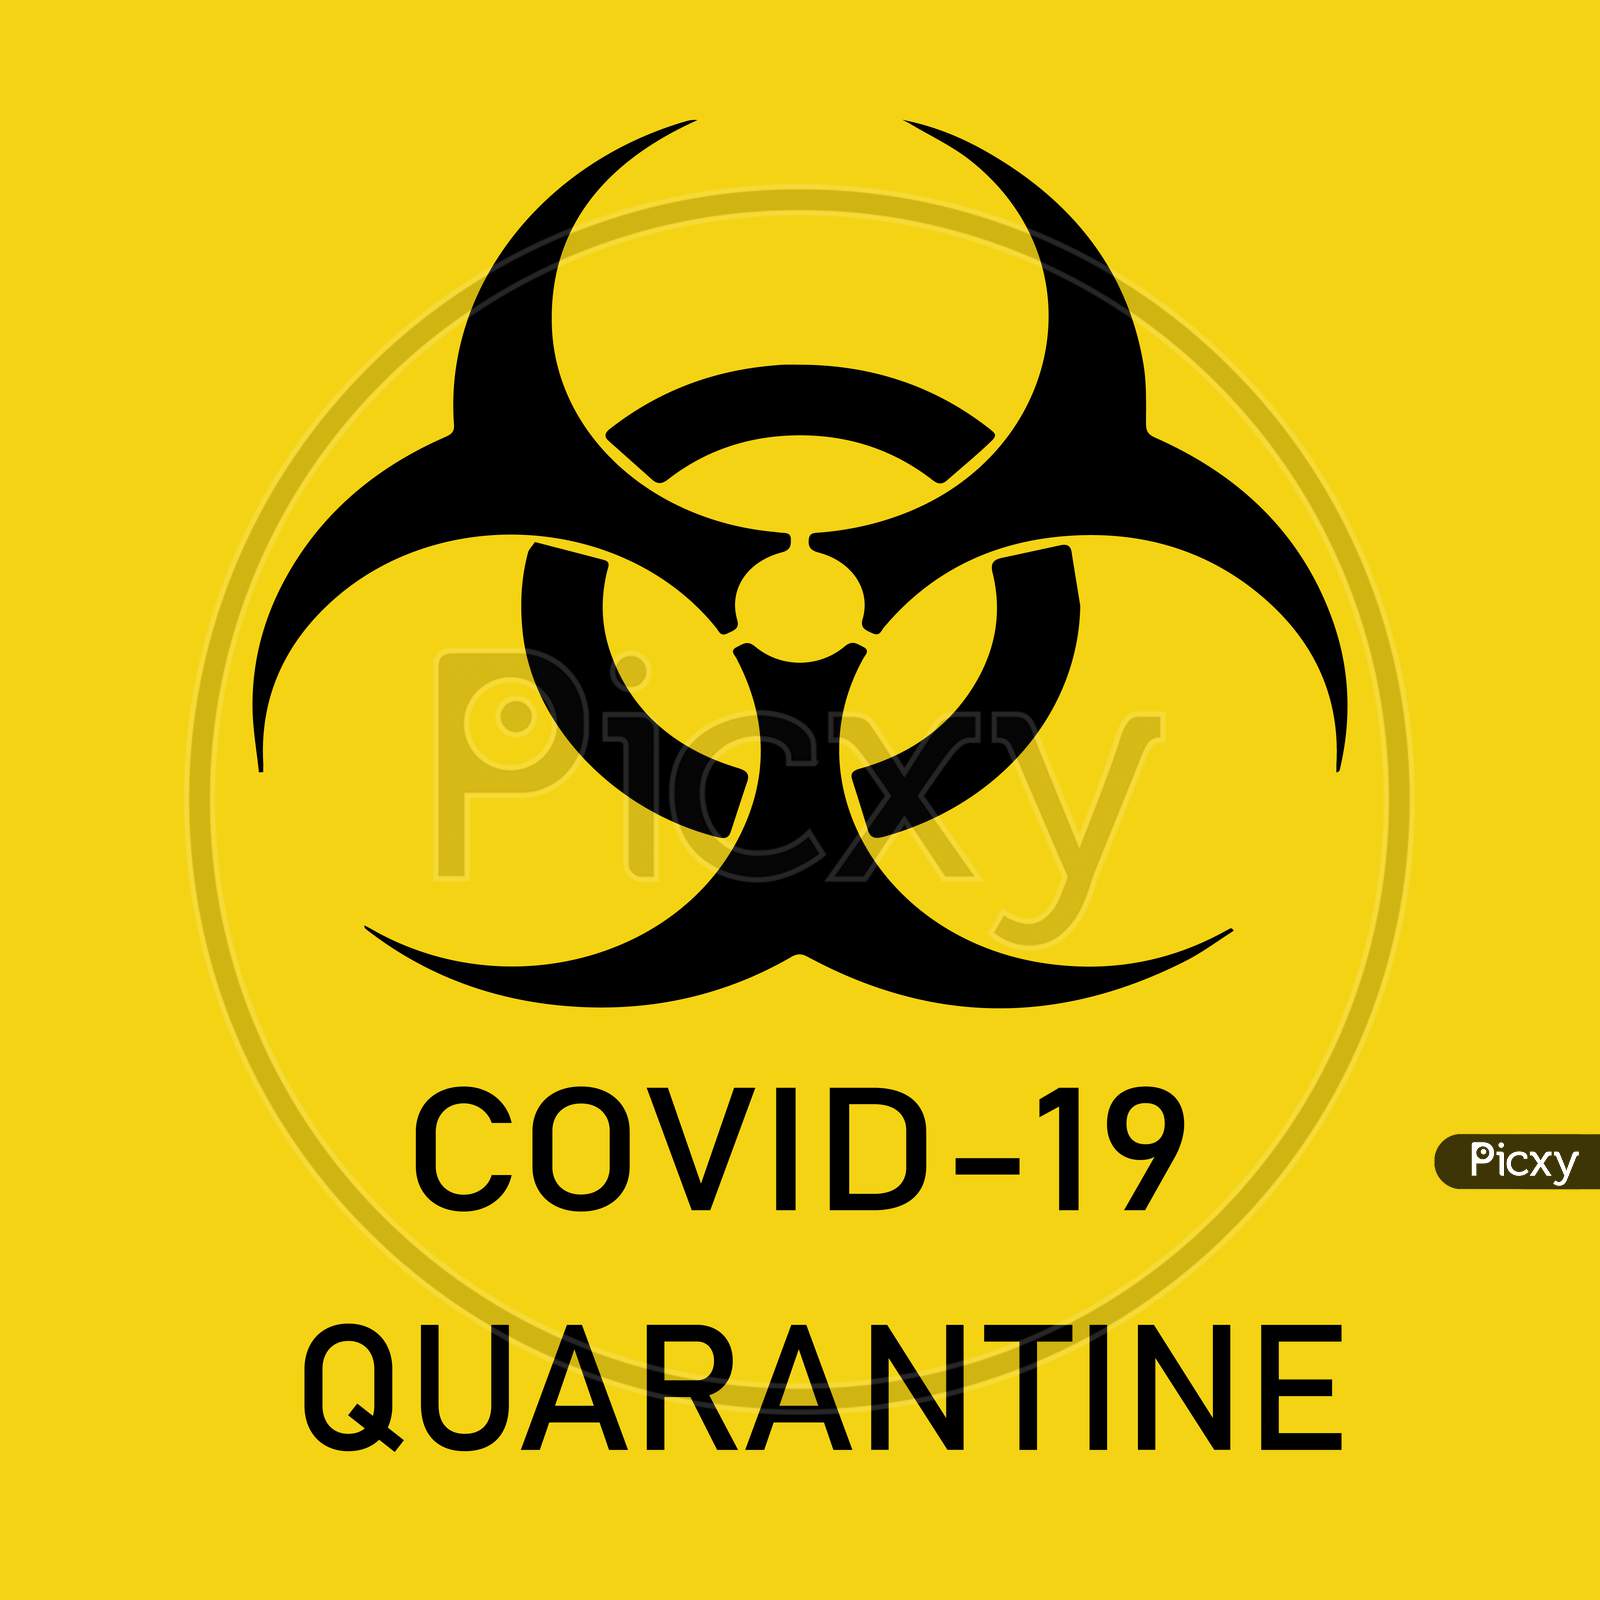 Covid-19 Biohazard Warning Quarantine Poster. Vector Template For Posters, Banners, Advertising. Stop Covid-19. Danger Of Infection From Coronavirus Sign. Concept.